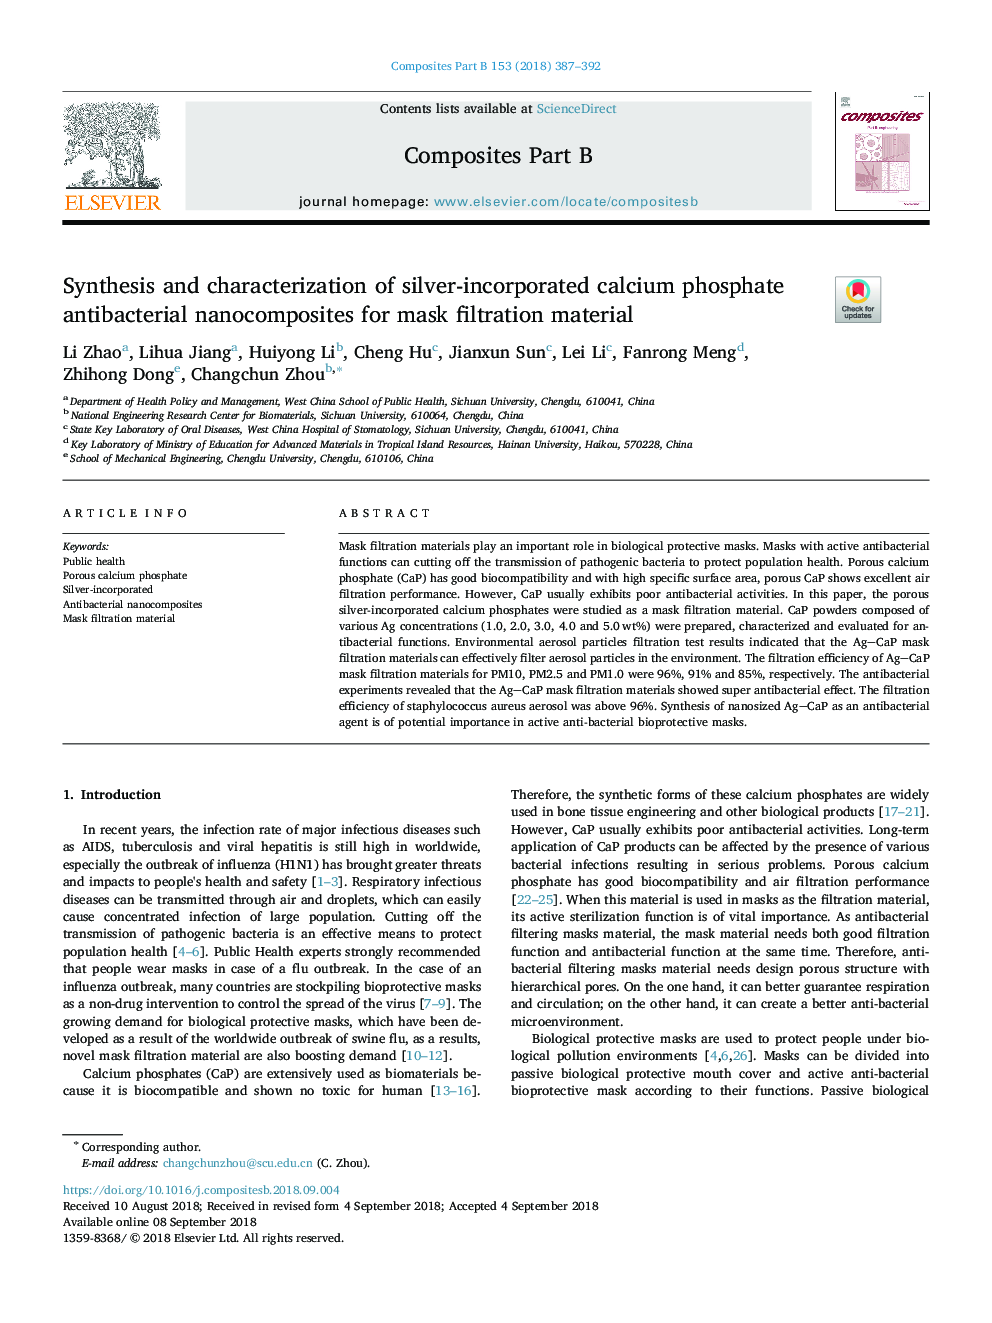 Synthesis and characterization of silver-incorporated calcium phosphate antibacterial nanocomposites for mask filtration material